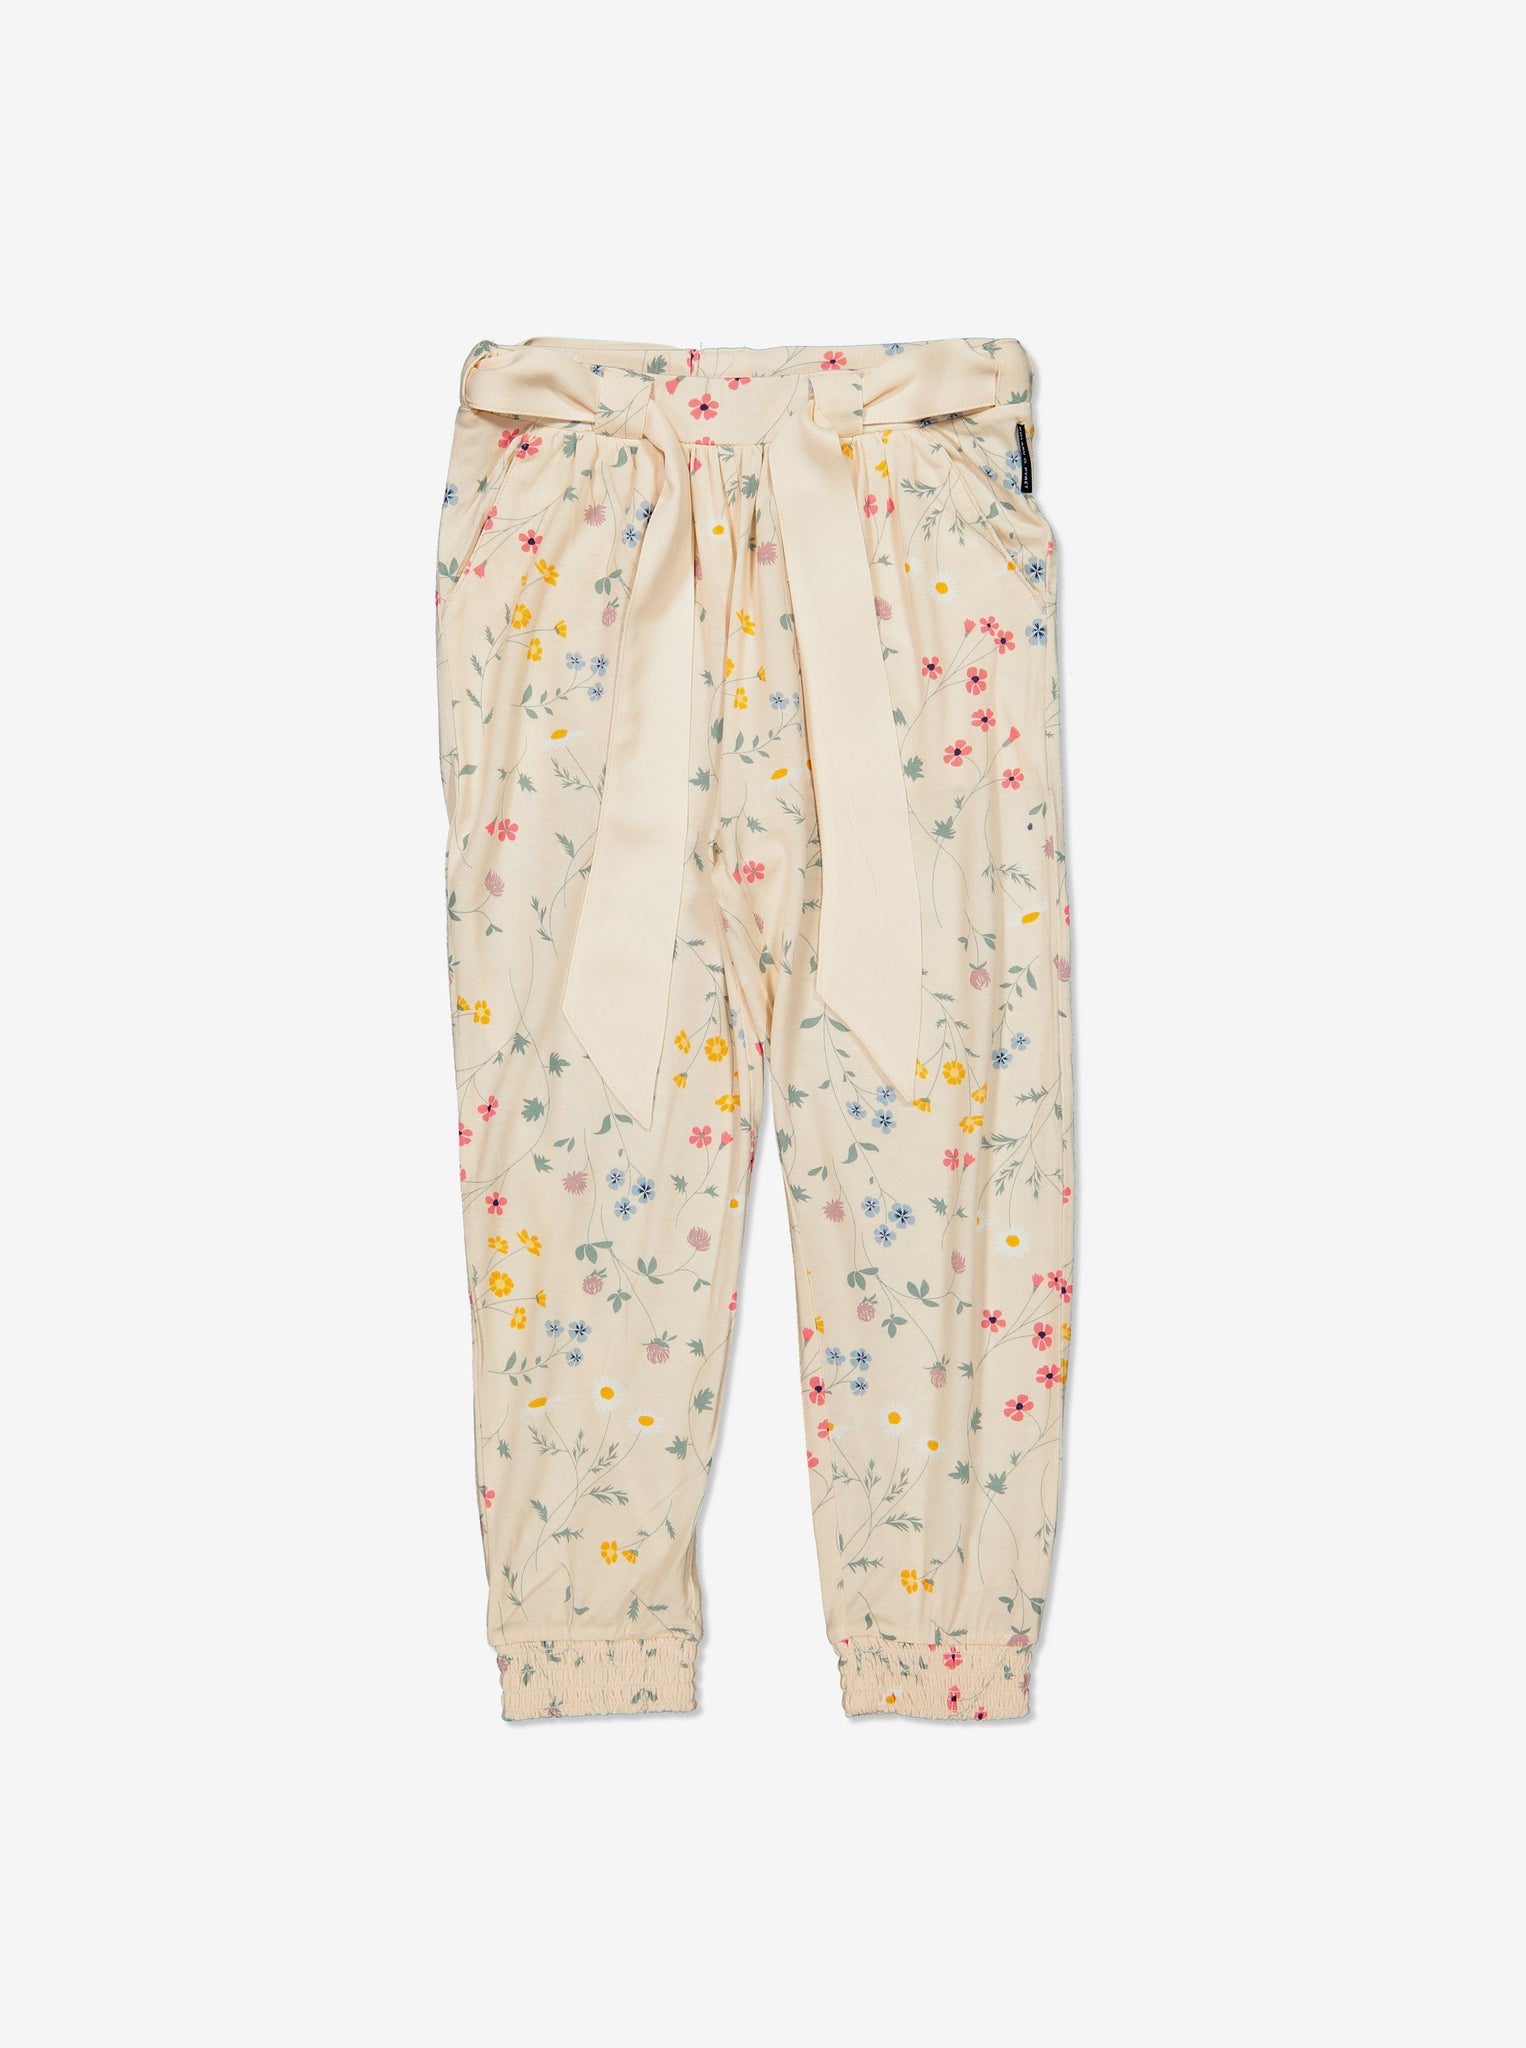 Girl White Floral Kids Trousers